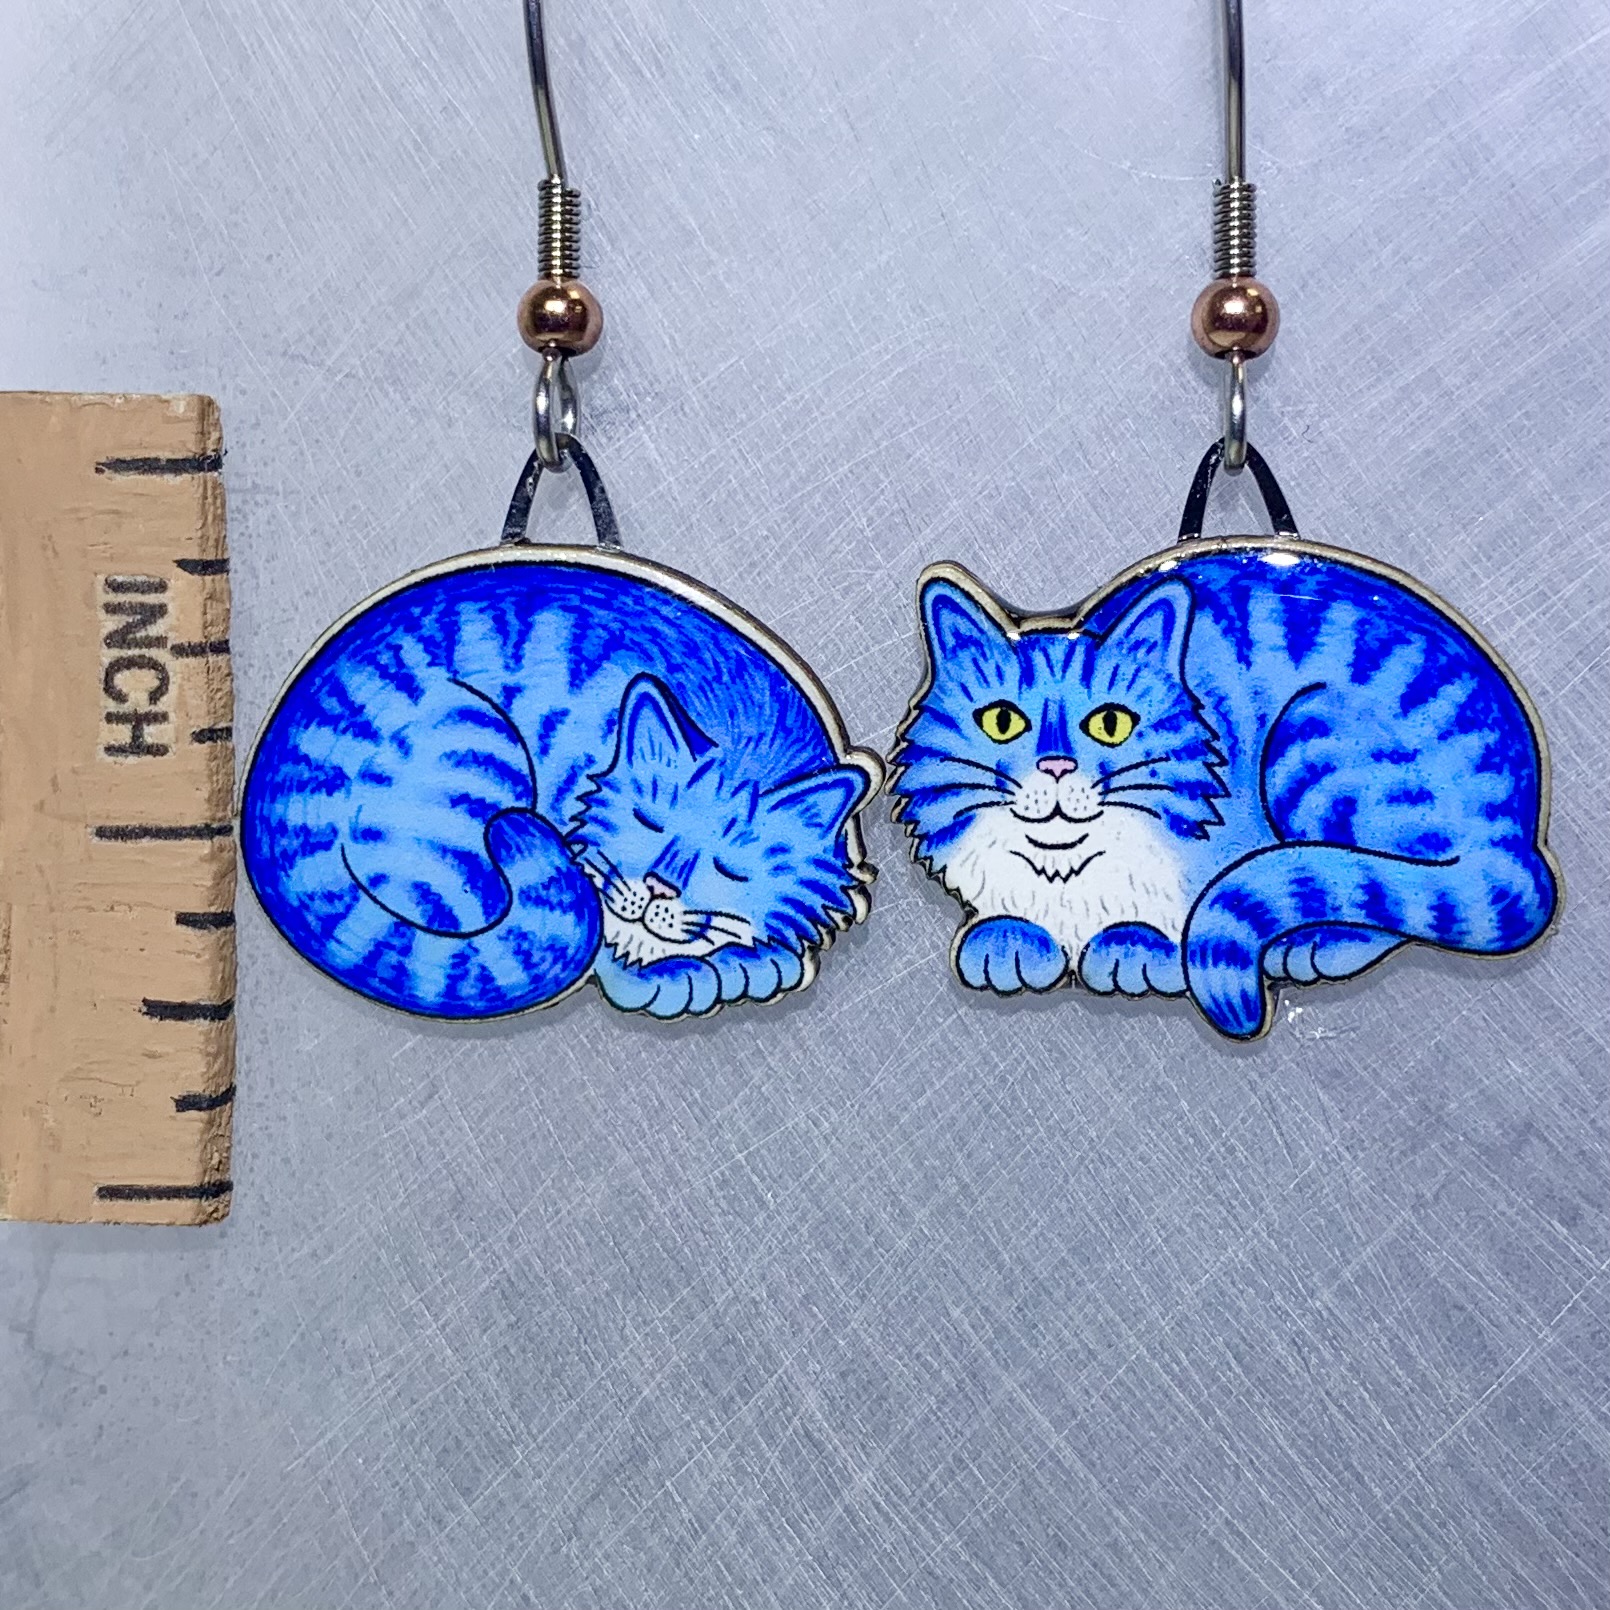 Picture shown is of 1 inch tall pair of earrings of the pet the Blue Napping Cat.